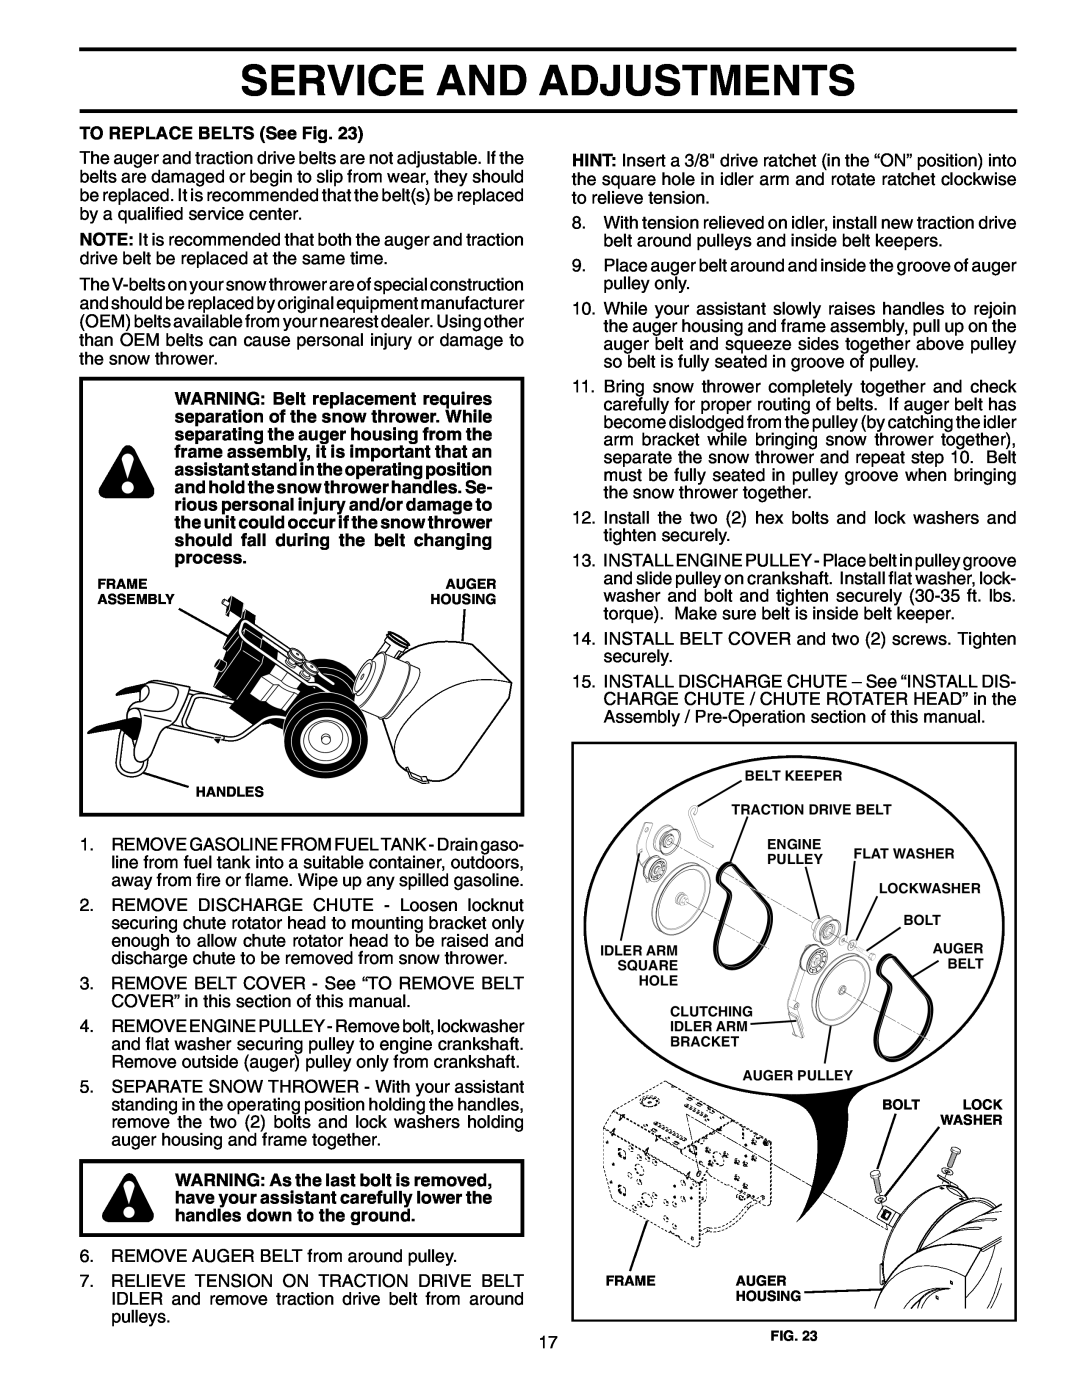 Husqvarna 9527SBEB owner manual Service And Adjustments, TO REPLACE BELTS See Fig 